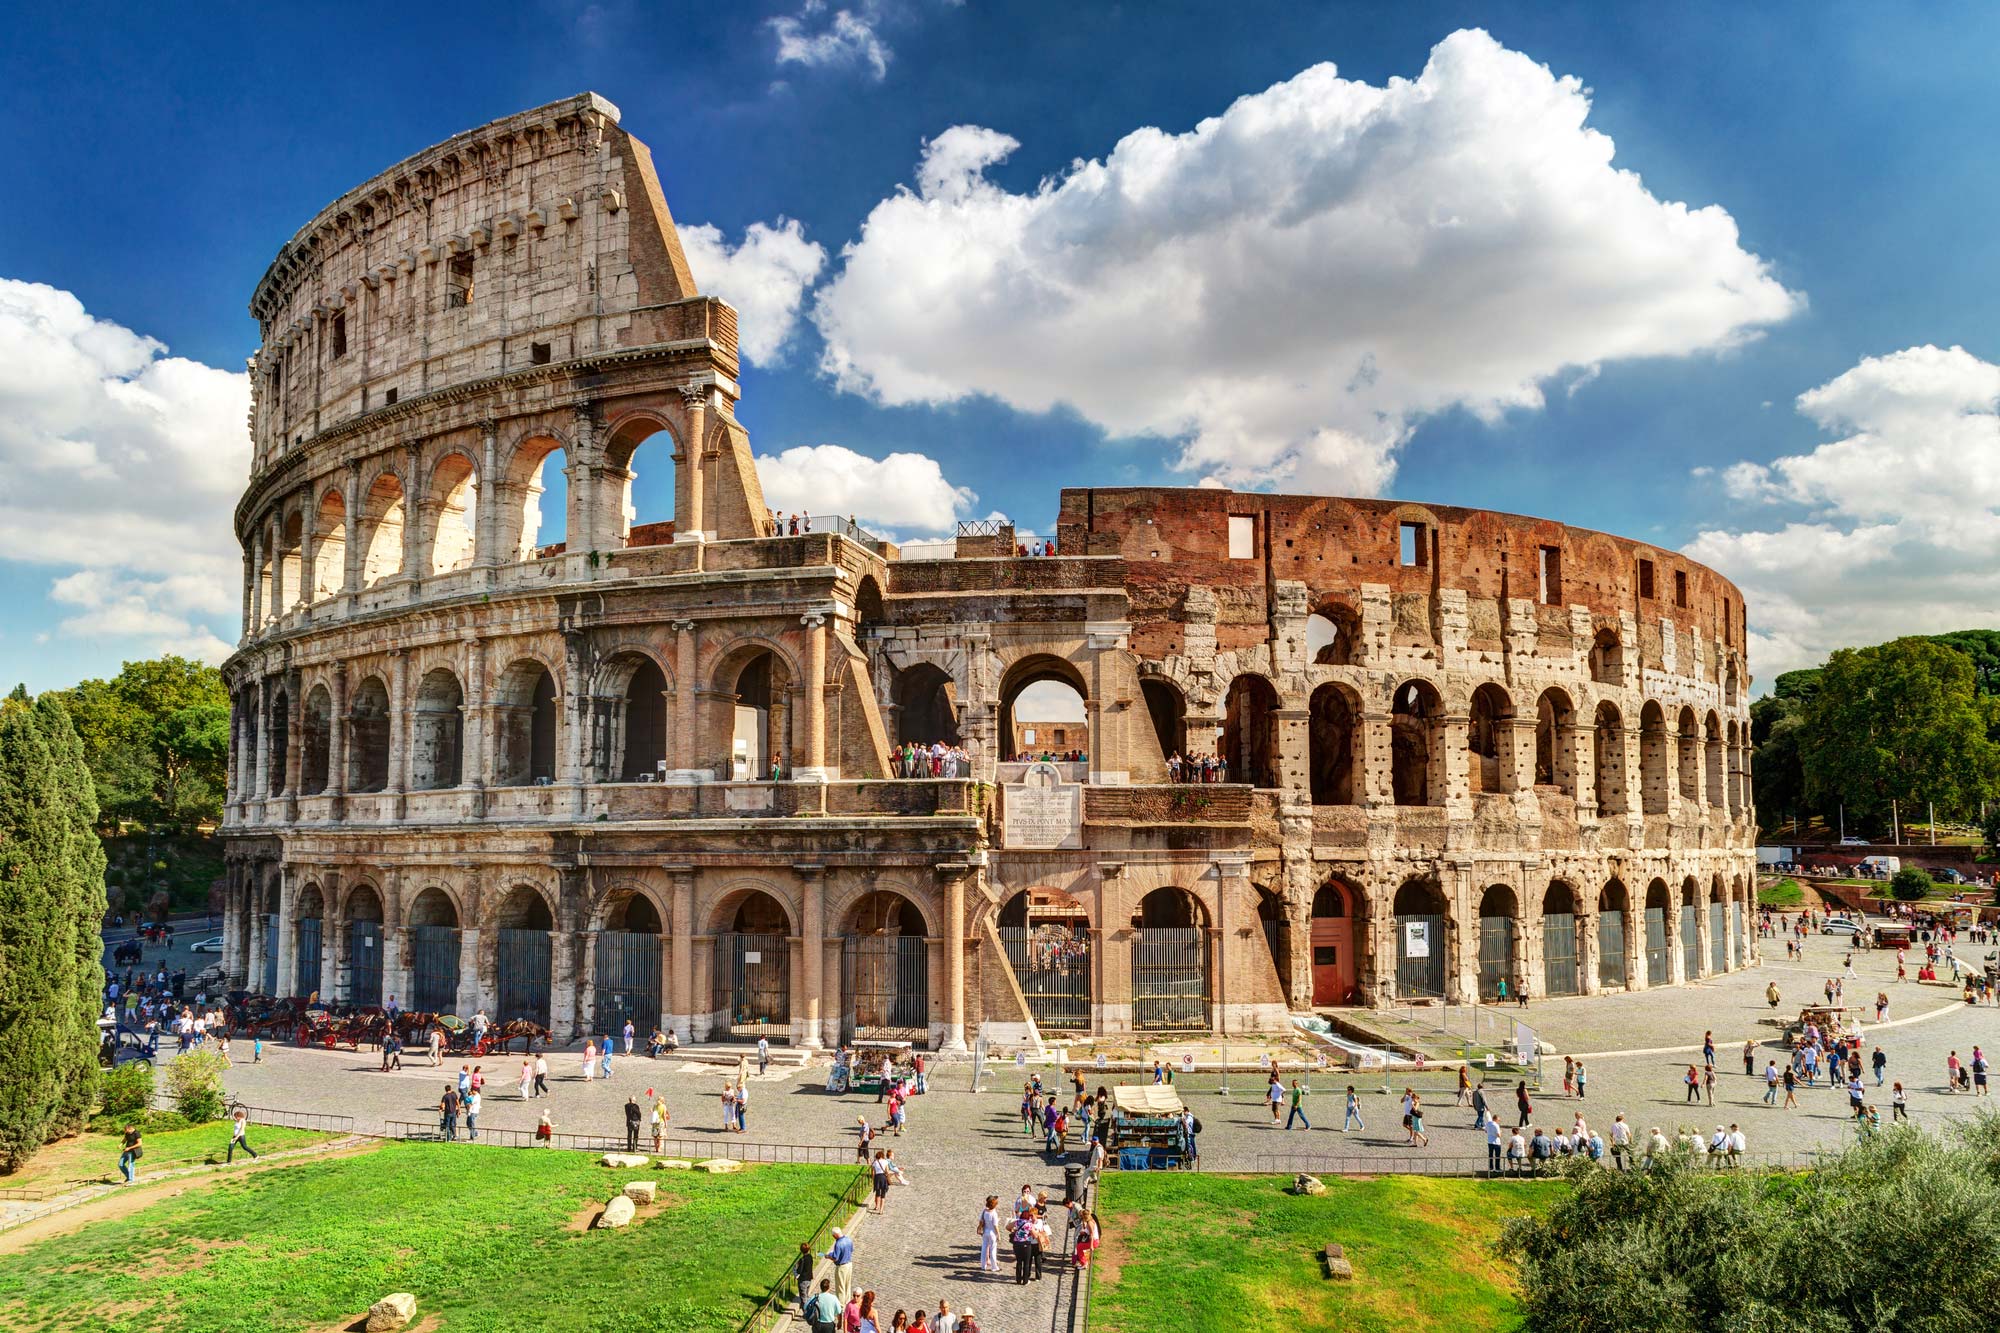 What happened at the Colosseum in Rome?